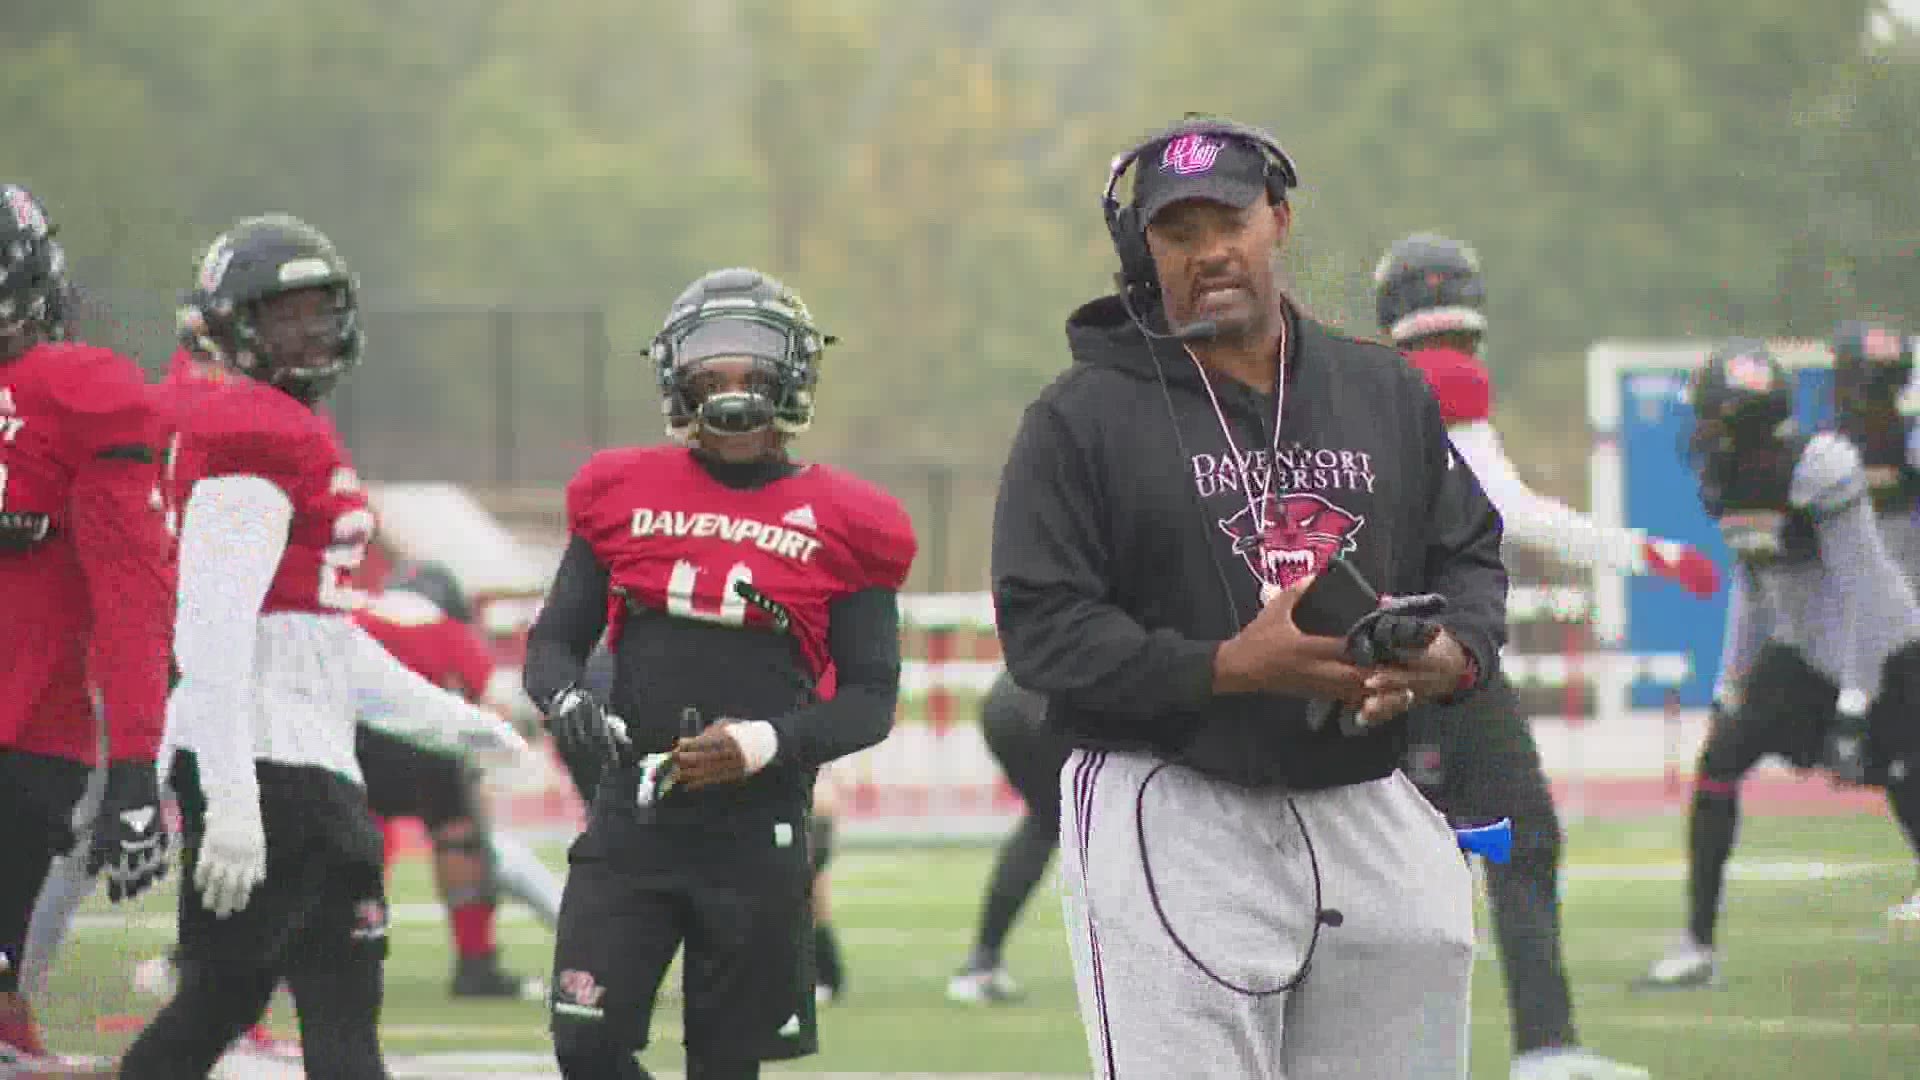 Davenport head coach Sparky McEwen believes D-II schools could actually benefit from the restrictions the ongoing pandemic has placed on recruiting.